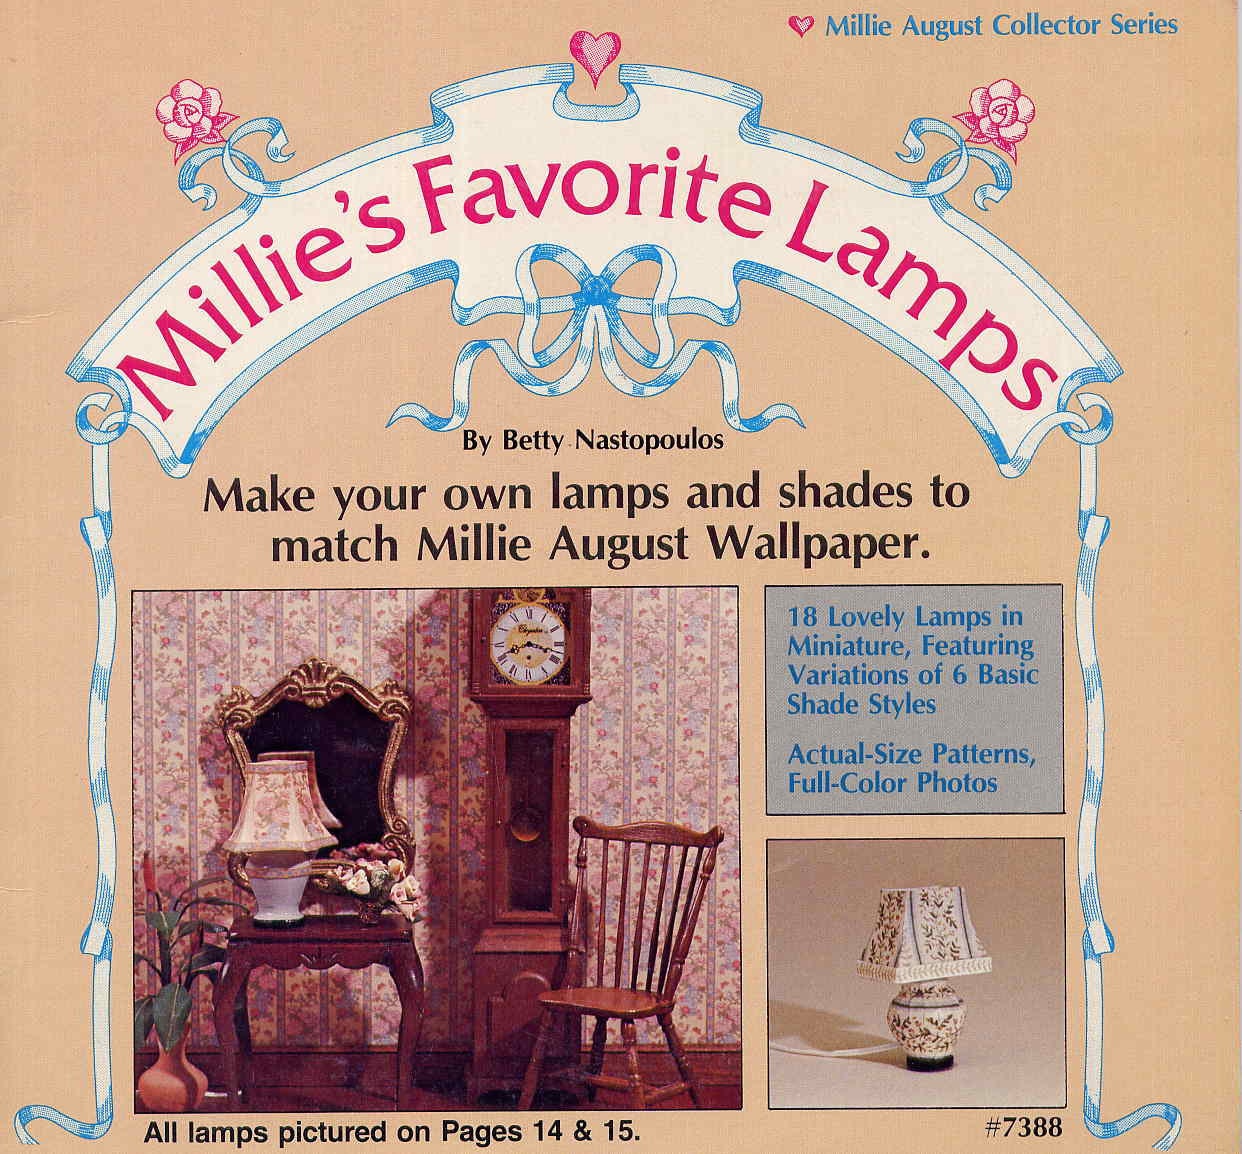    Lamp Shades on 1980 Millie S Favorite Lamps Book  Make Your Own Lamps And Shades